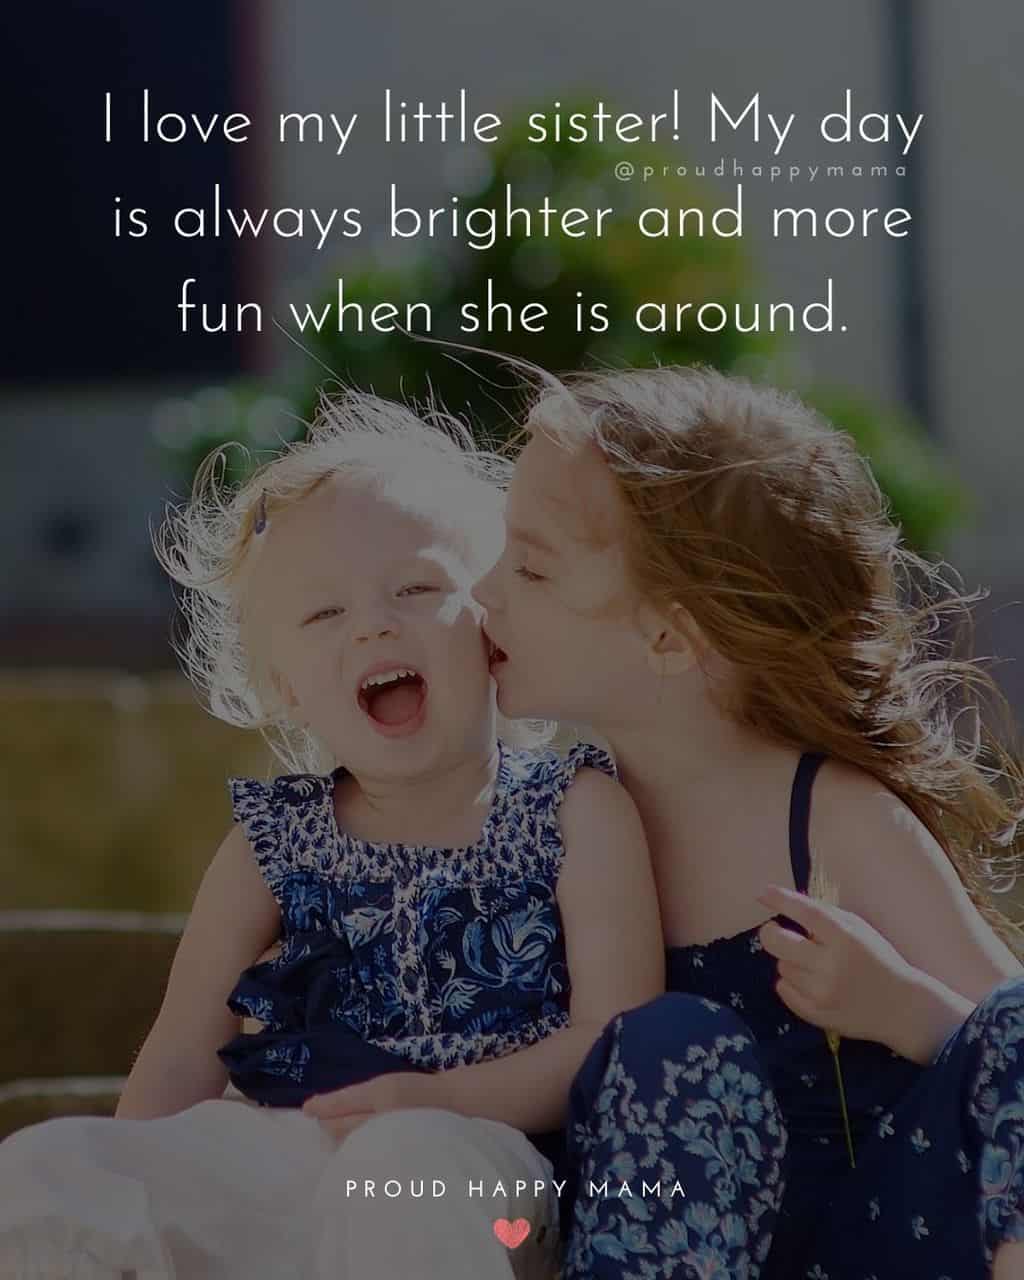 70+ Heartfelt I Love My Sister Quotes [With Images]